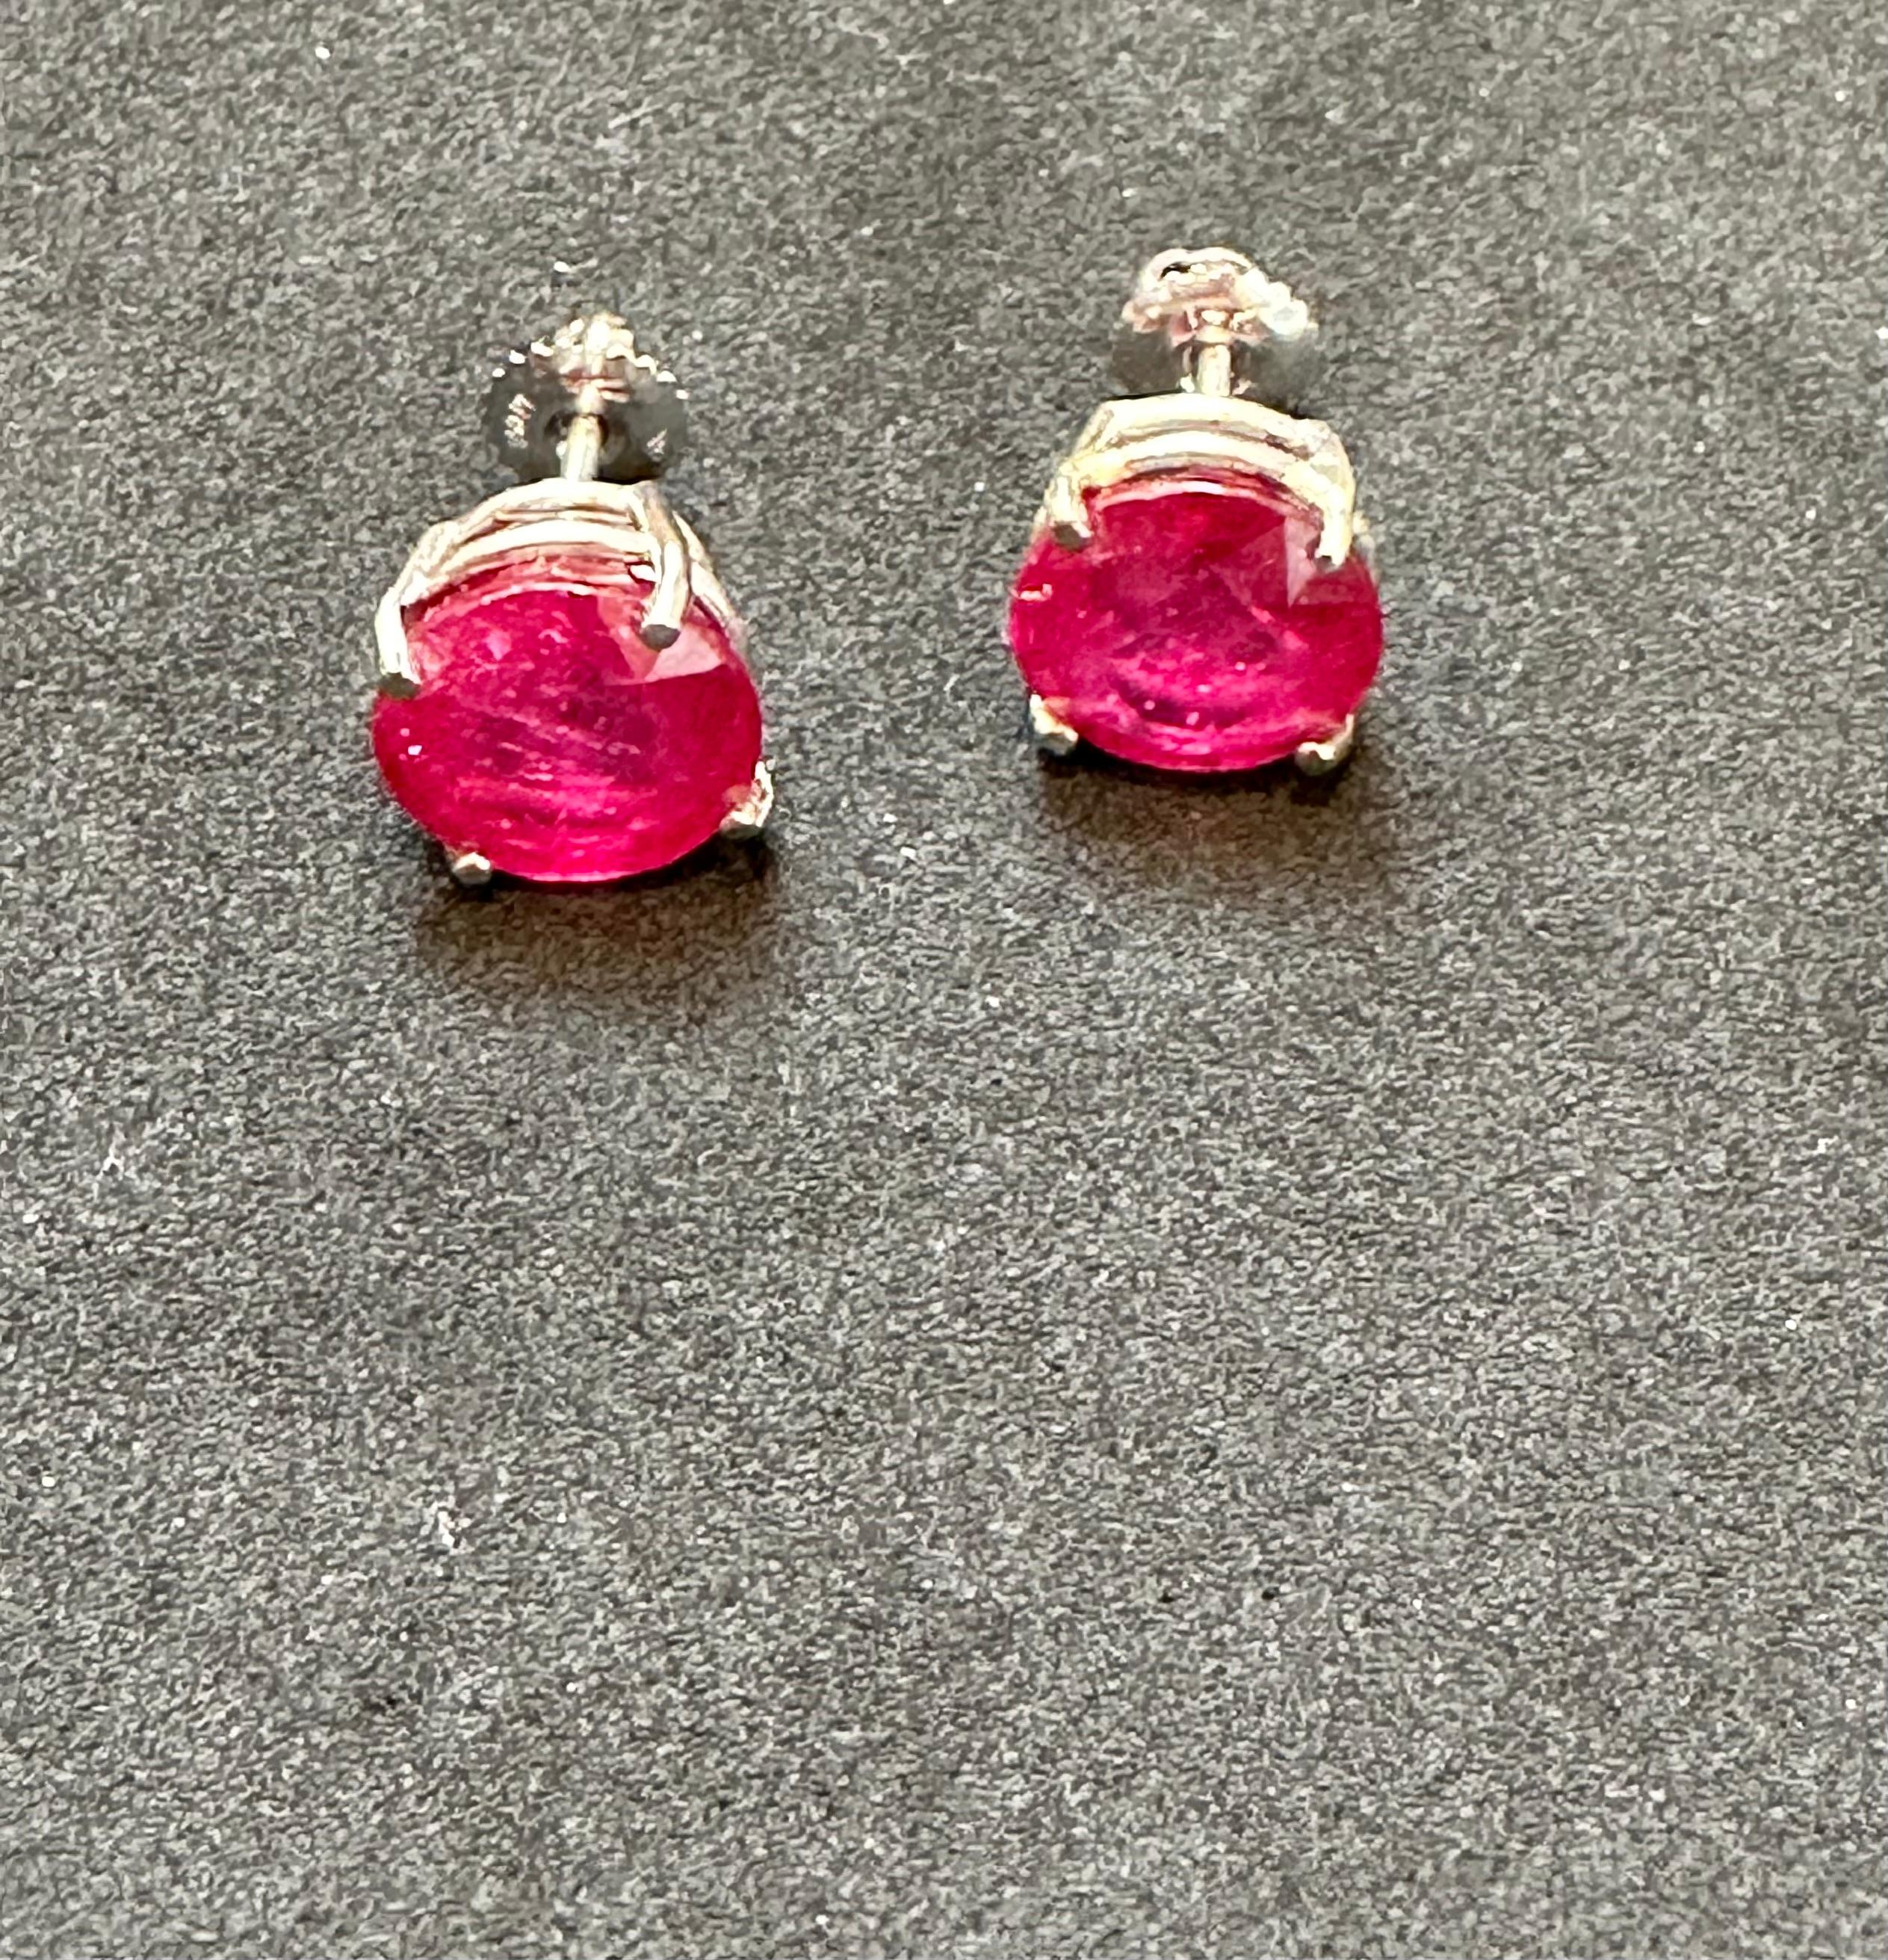 6 Carat Solitaire Treated Ruby Earrings 4 Prongs Screw Back 14 Karat White Gold 4